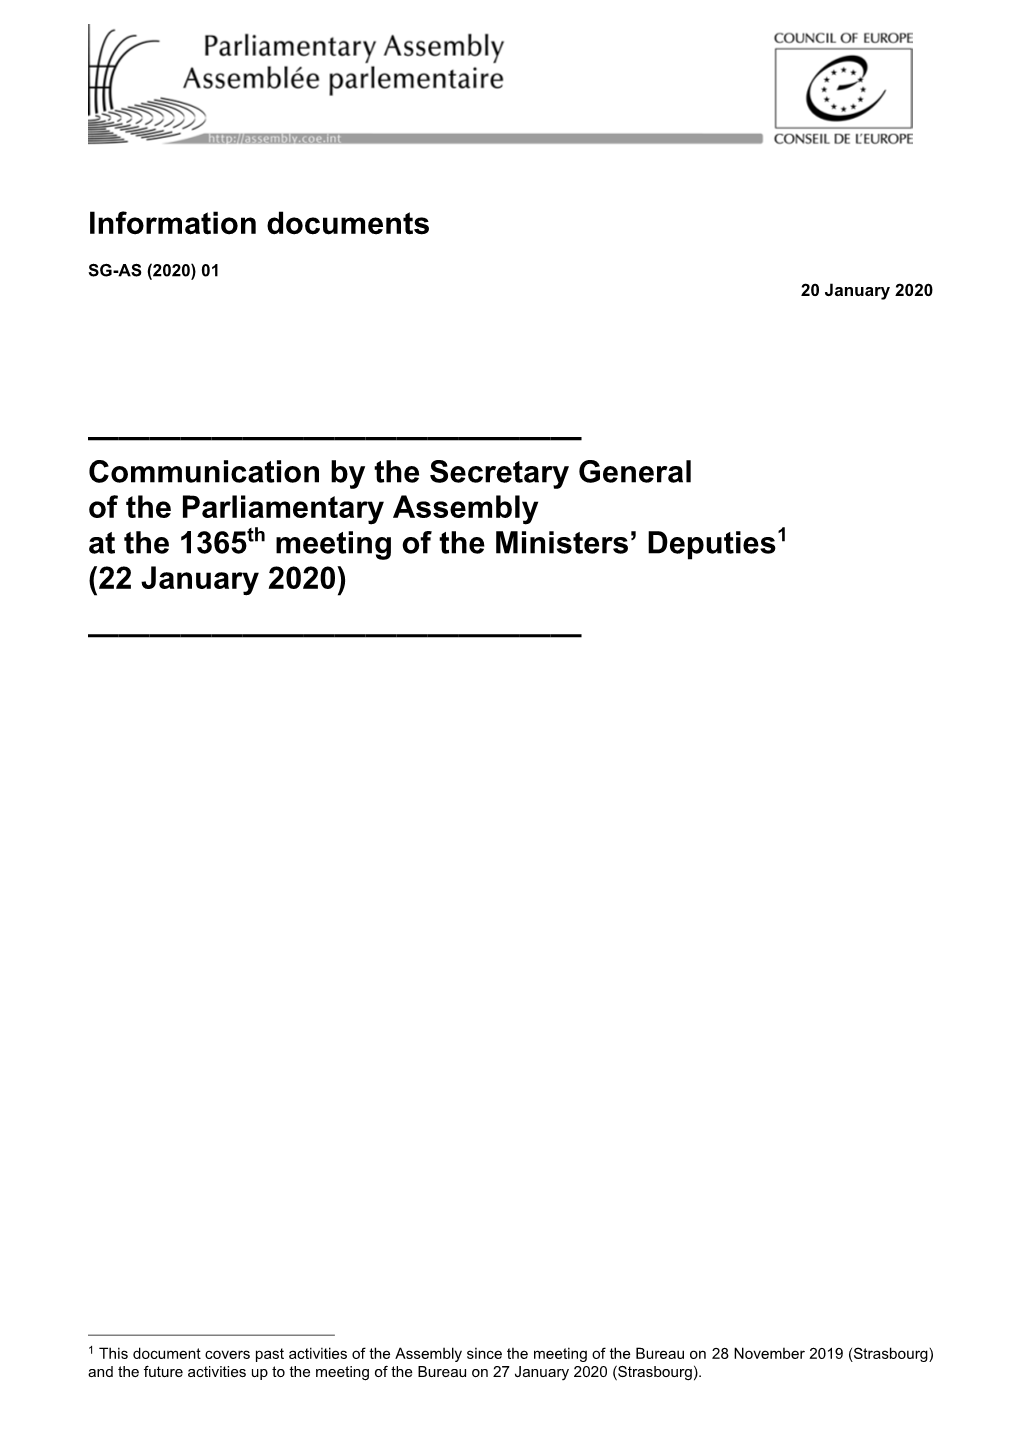 Communication by the Secretary General of the Parliamentary Assembly at the 1365Th Meeting of the Ministers’ Deputies1 (22 January 2020)